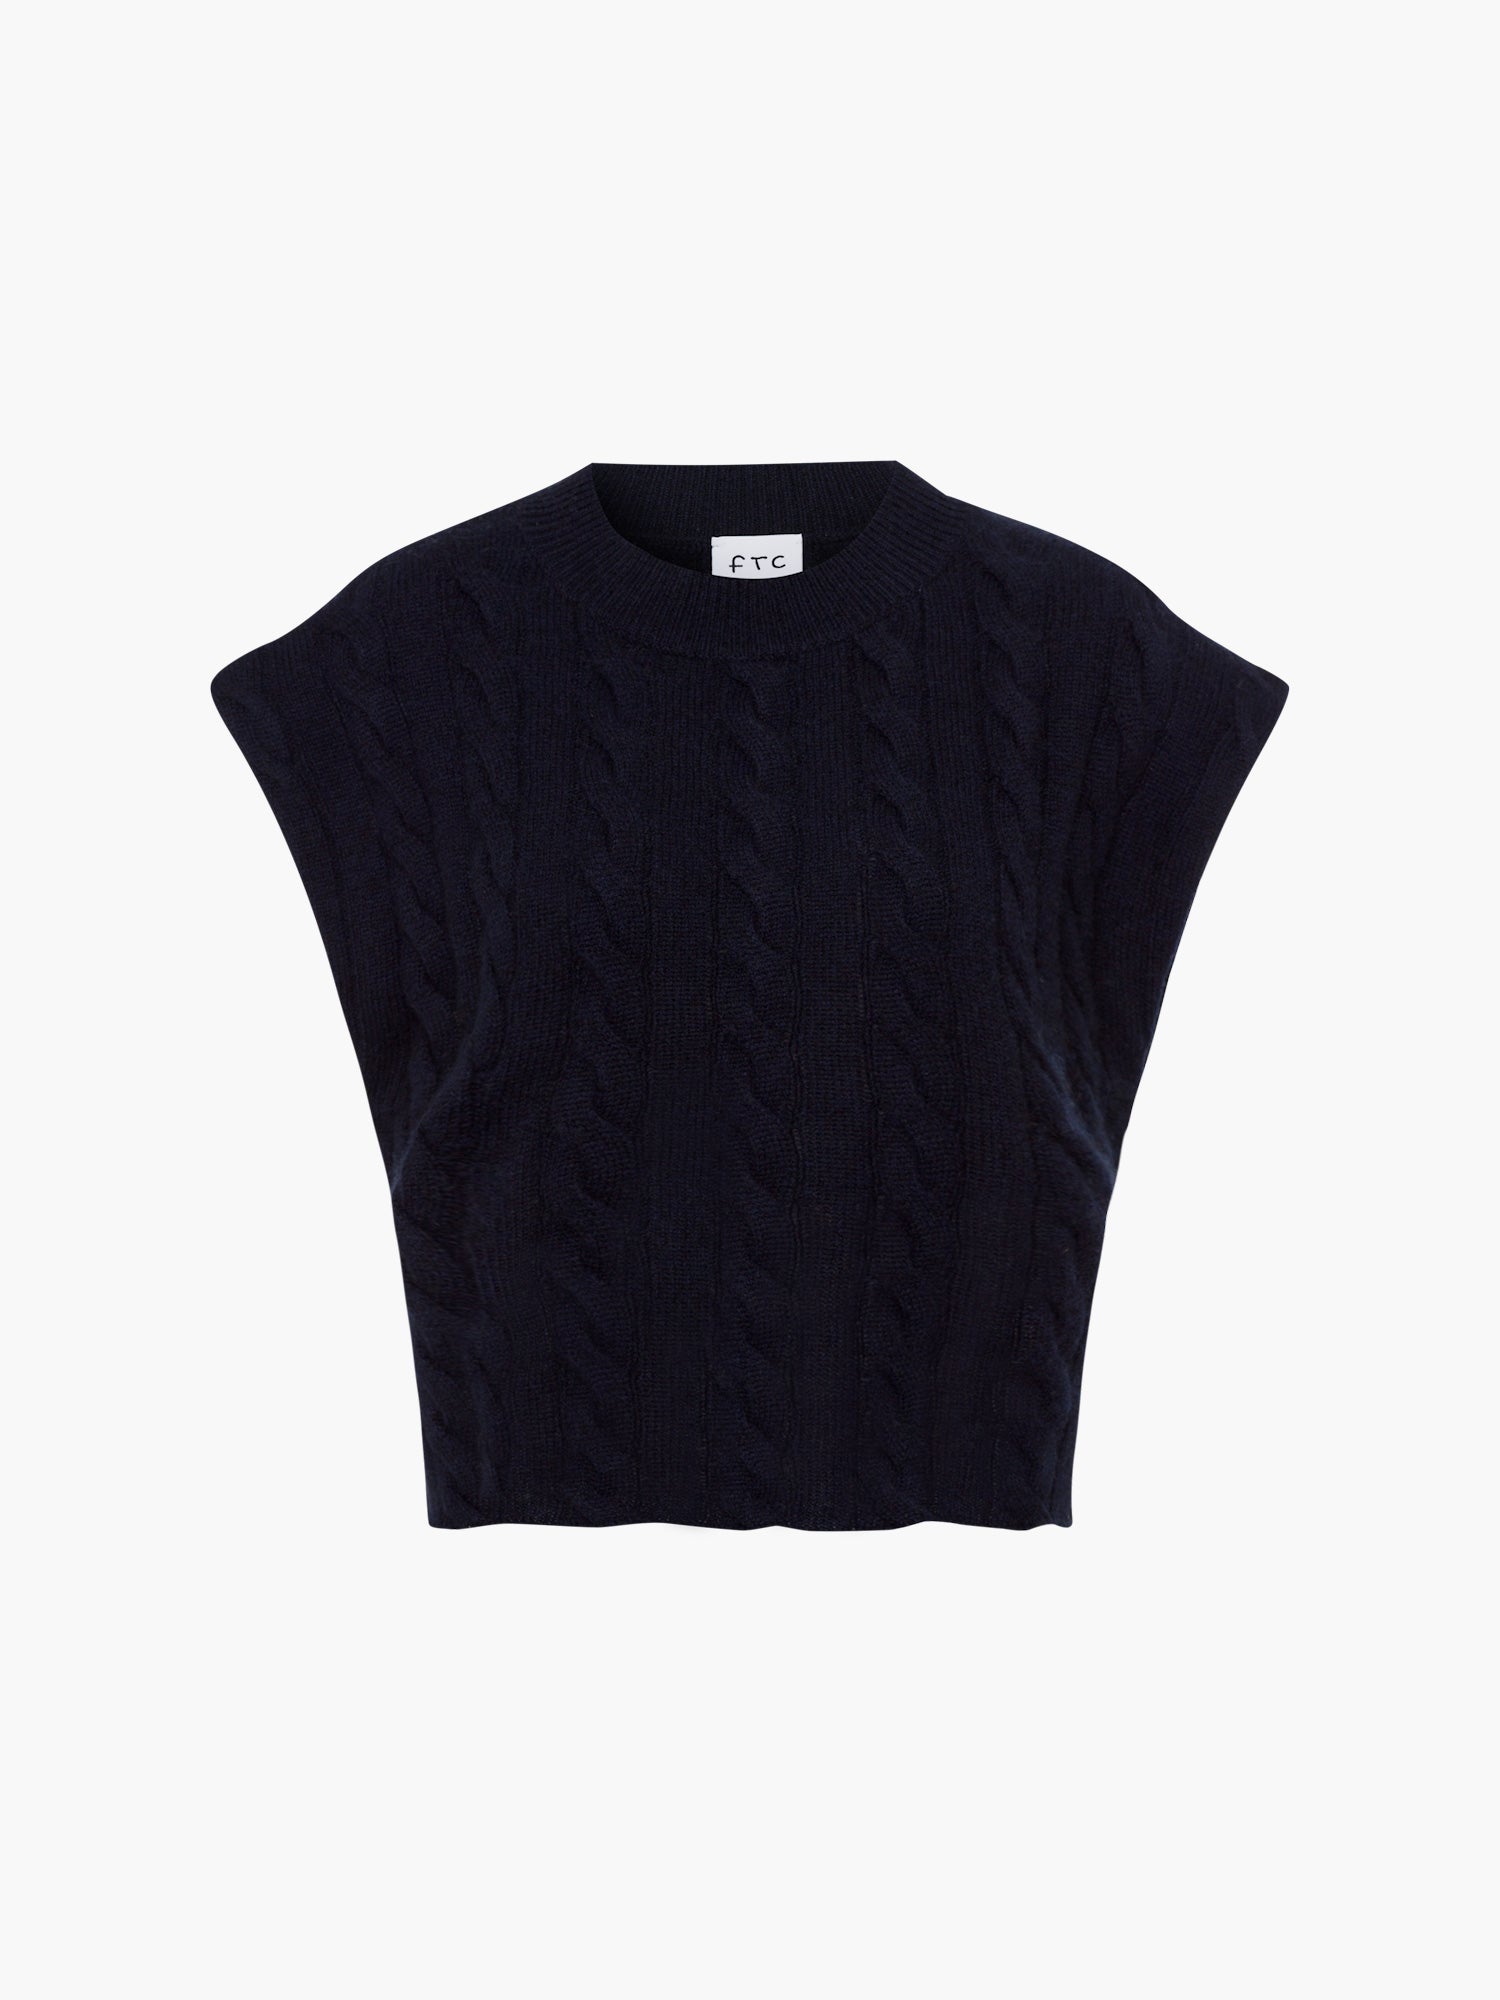 FTC-Cashmere-OUTLET-SALE-Pullover-RN-no-Sleeve-Strick-ARCHIVE-COLLECTION_0ee77c61-c8df-4342-ae75-a9ae8094f28e.jpg